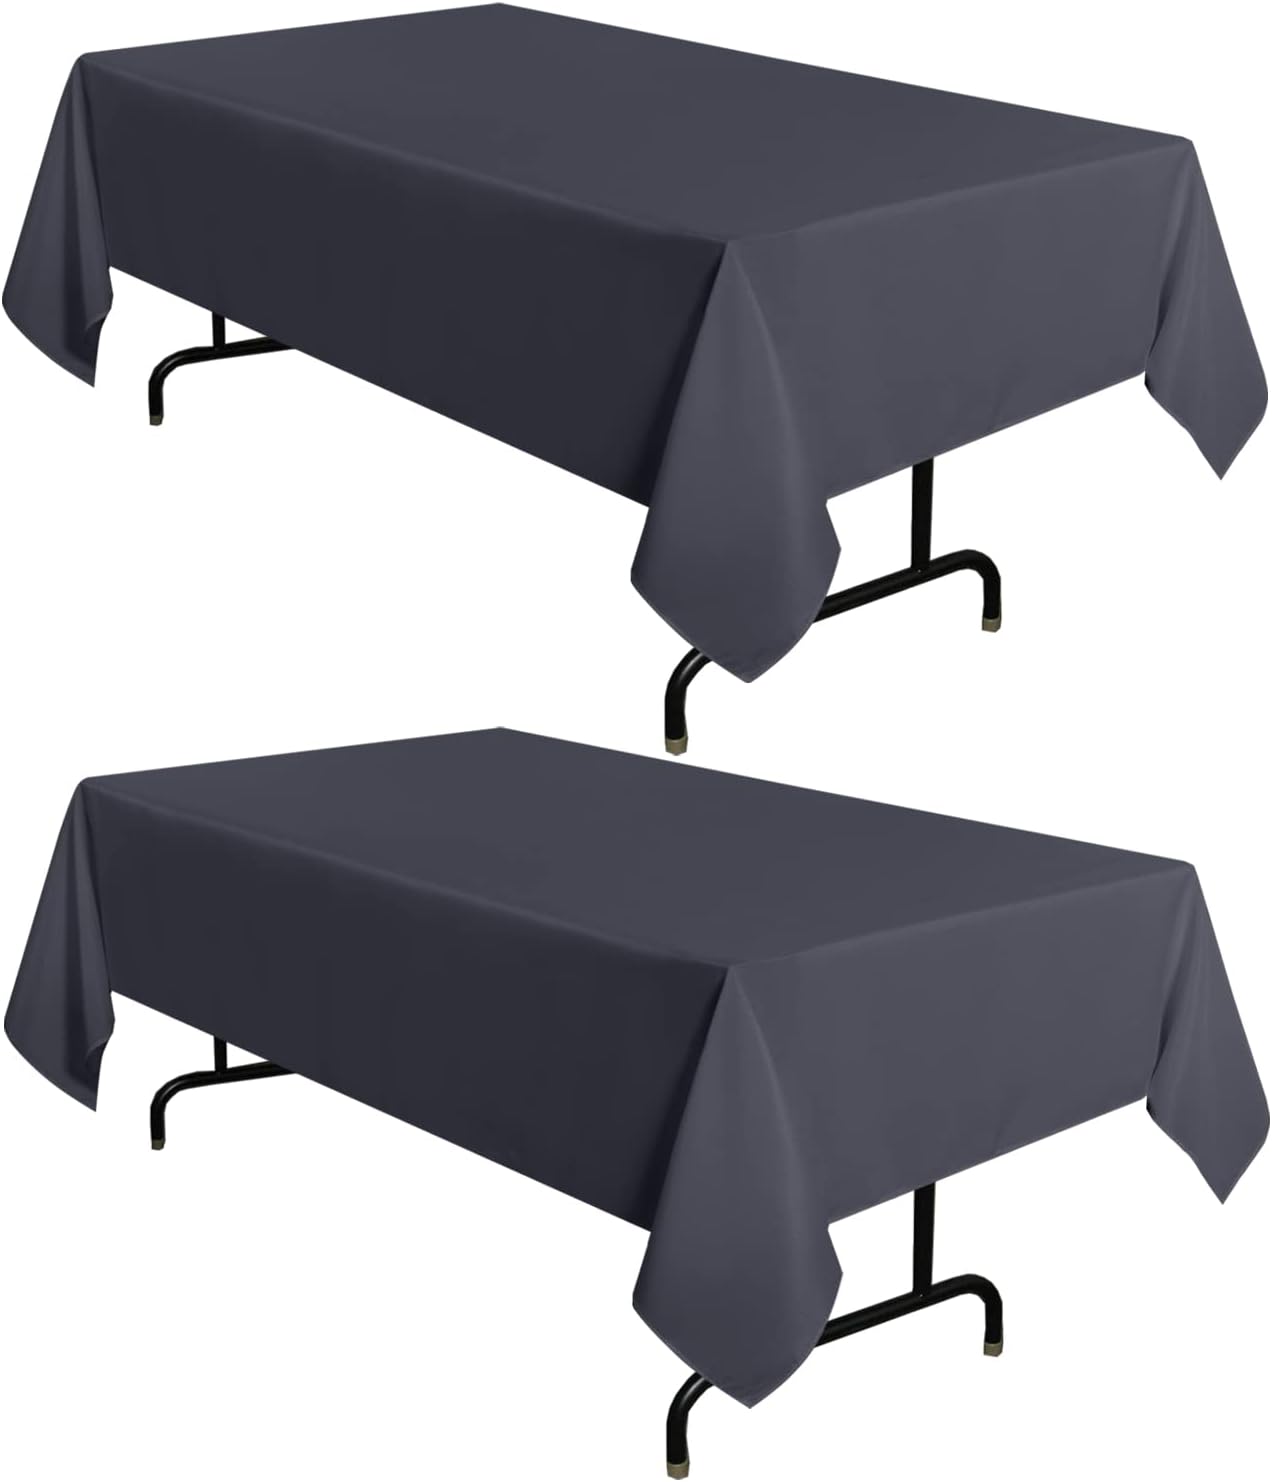 sancua 2 Pack Dark Grey Tablecloth 60 x 102 Inch, Rectangle 6 Feet Table Cloth - Stain and Wrinkle Resistant Washable Polyester Table Cover for Dining Table, Buffet Parties and Camping